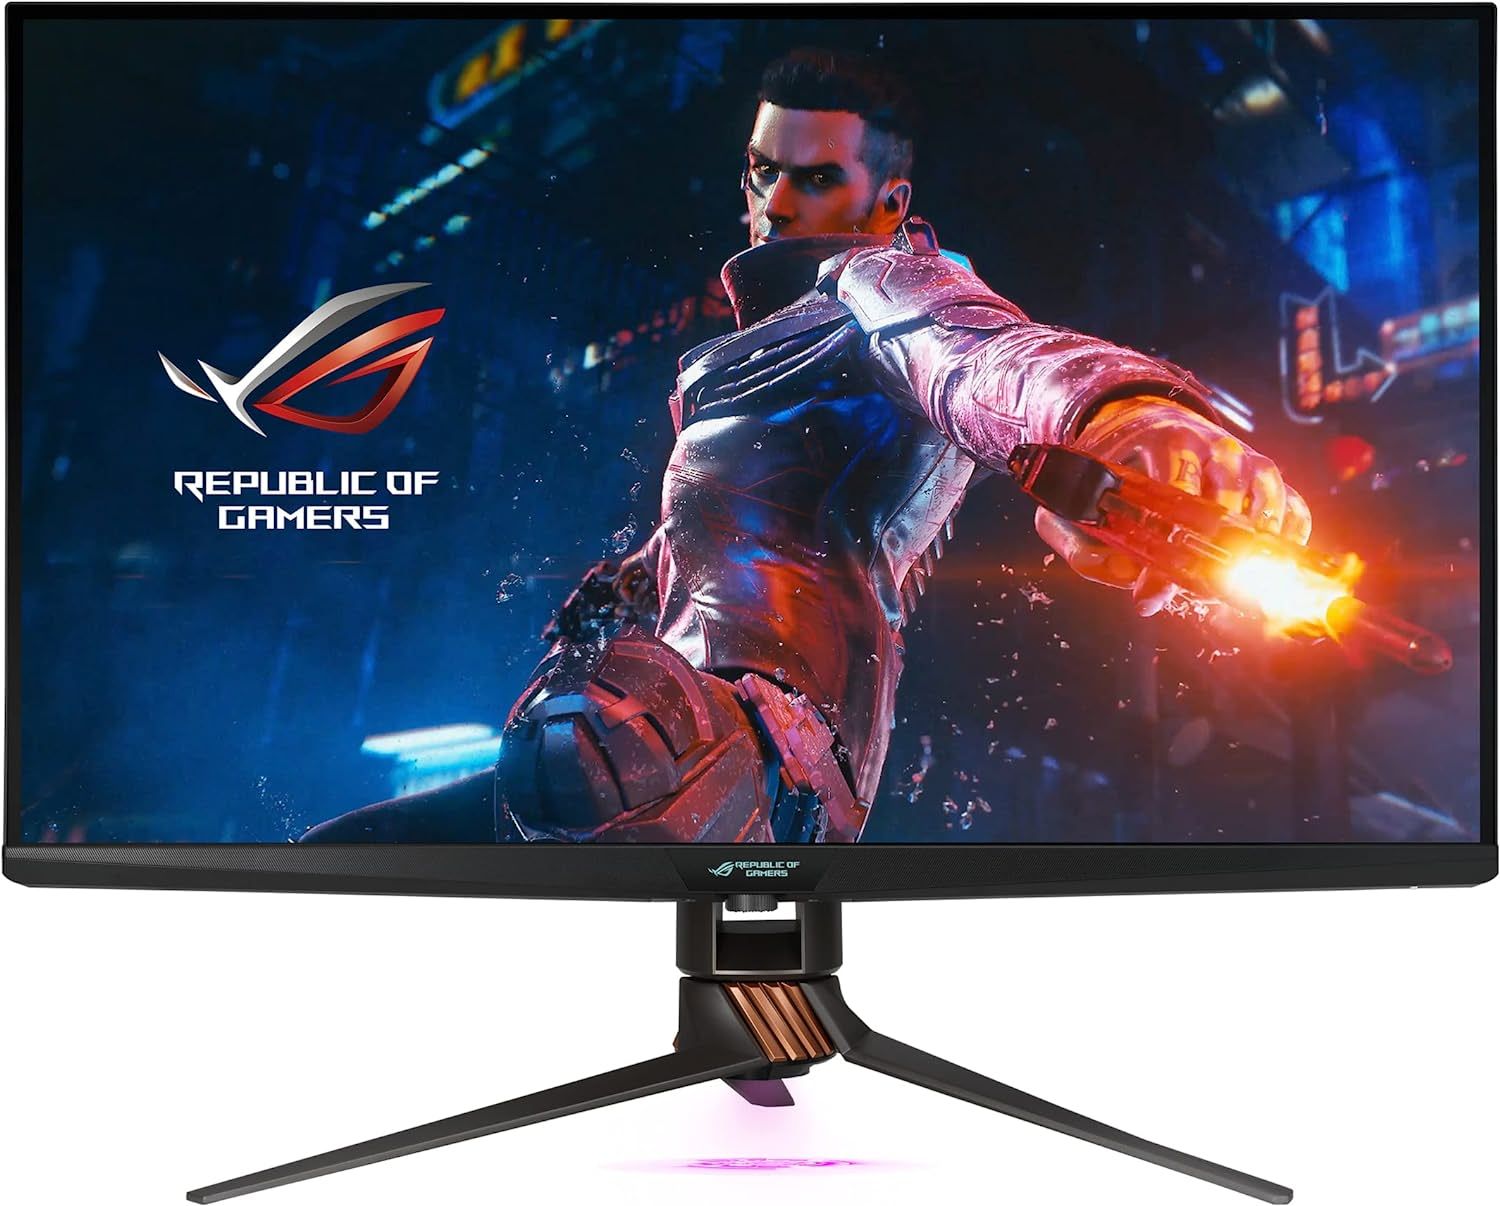 the asus rog swift pg32uqx featuring rog branded artwork